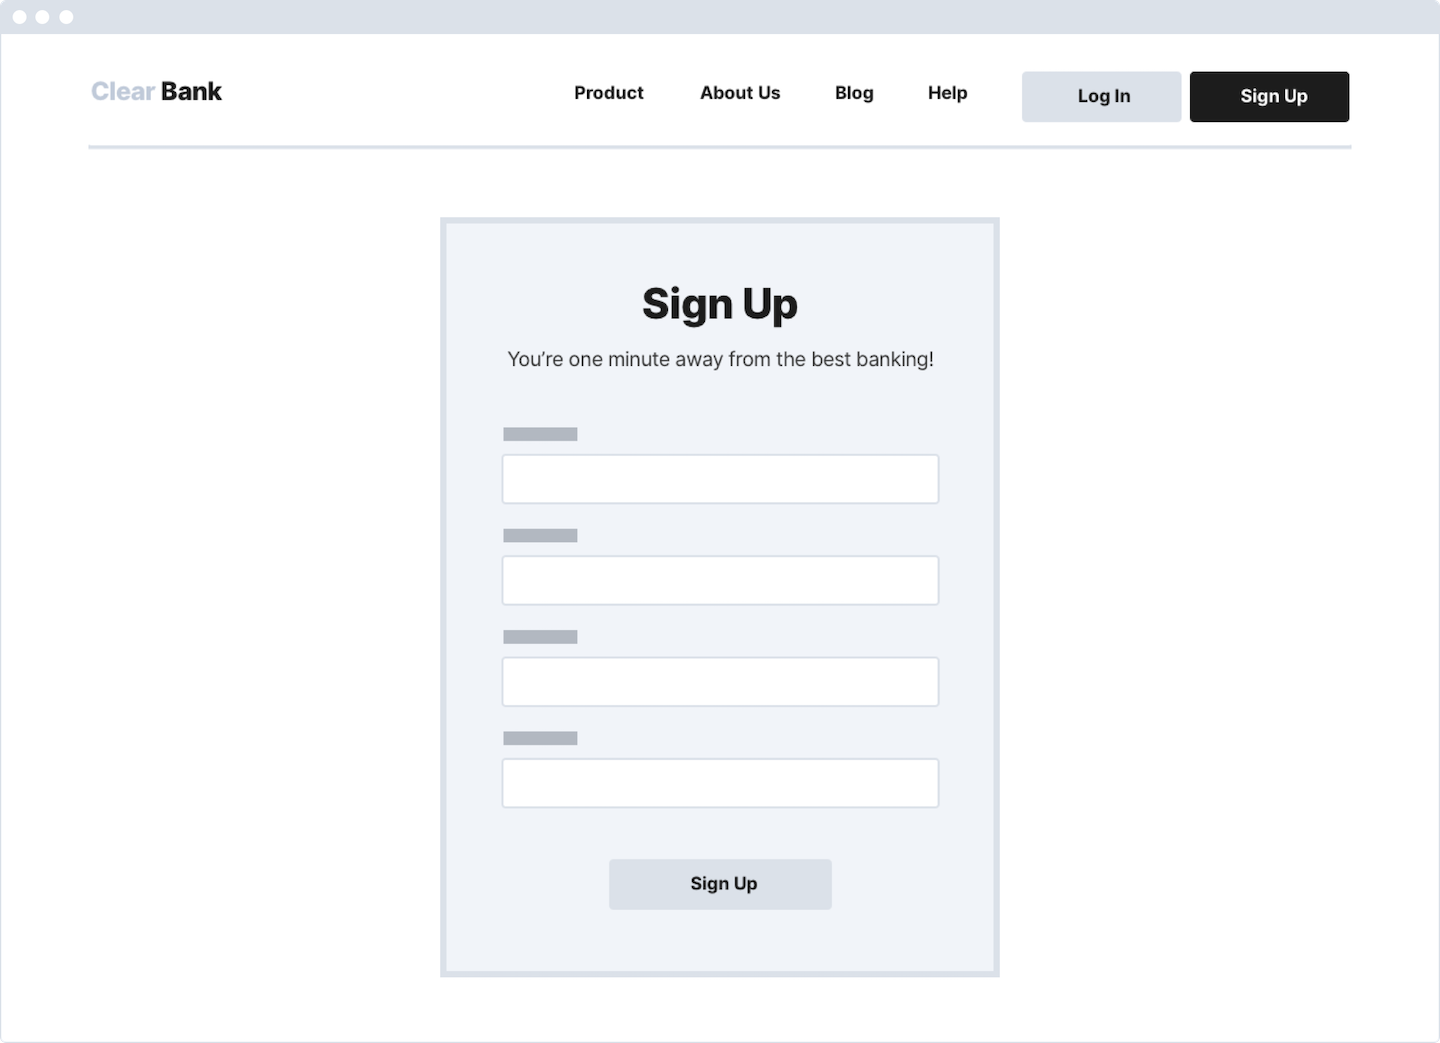 An example of a signup page on the Clear Bank website.